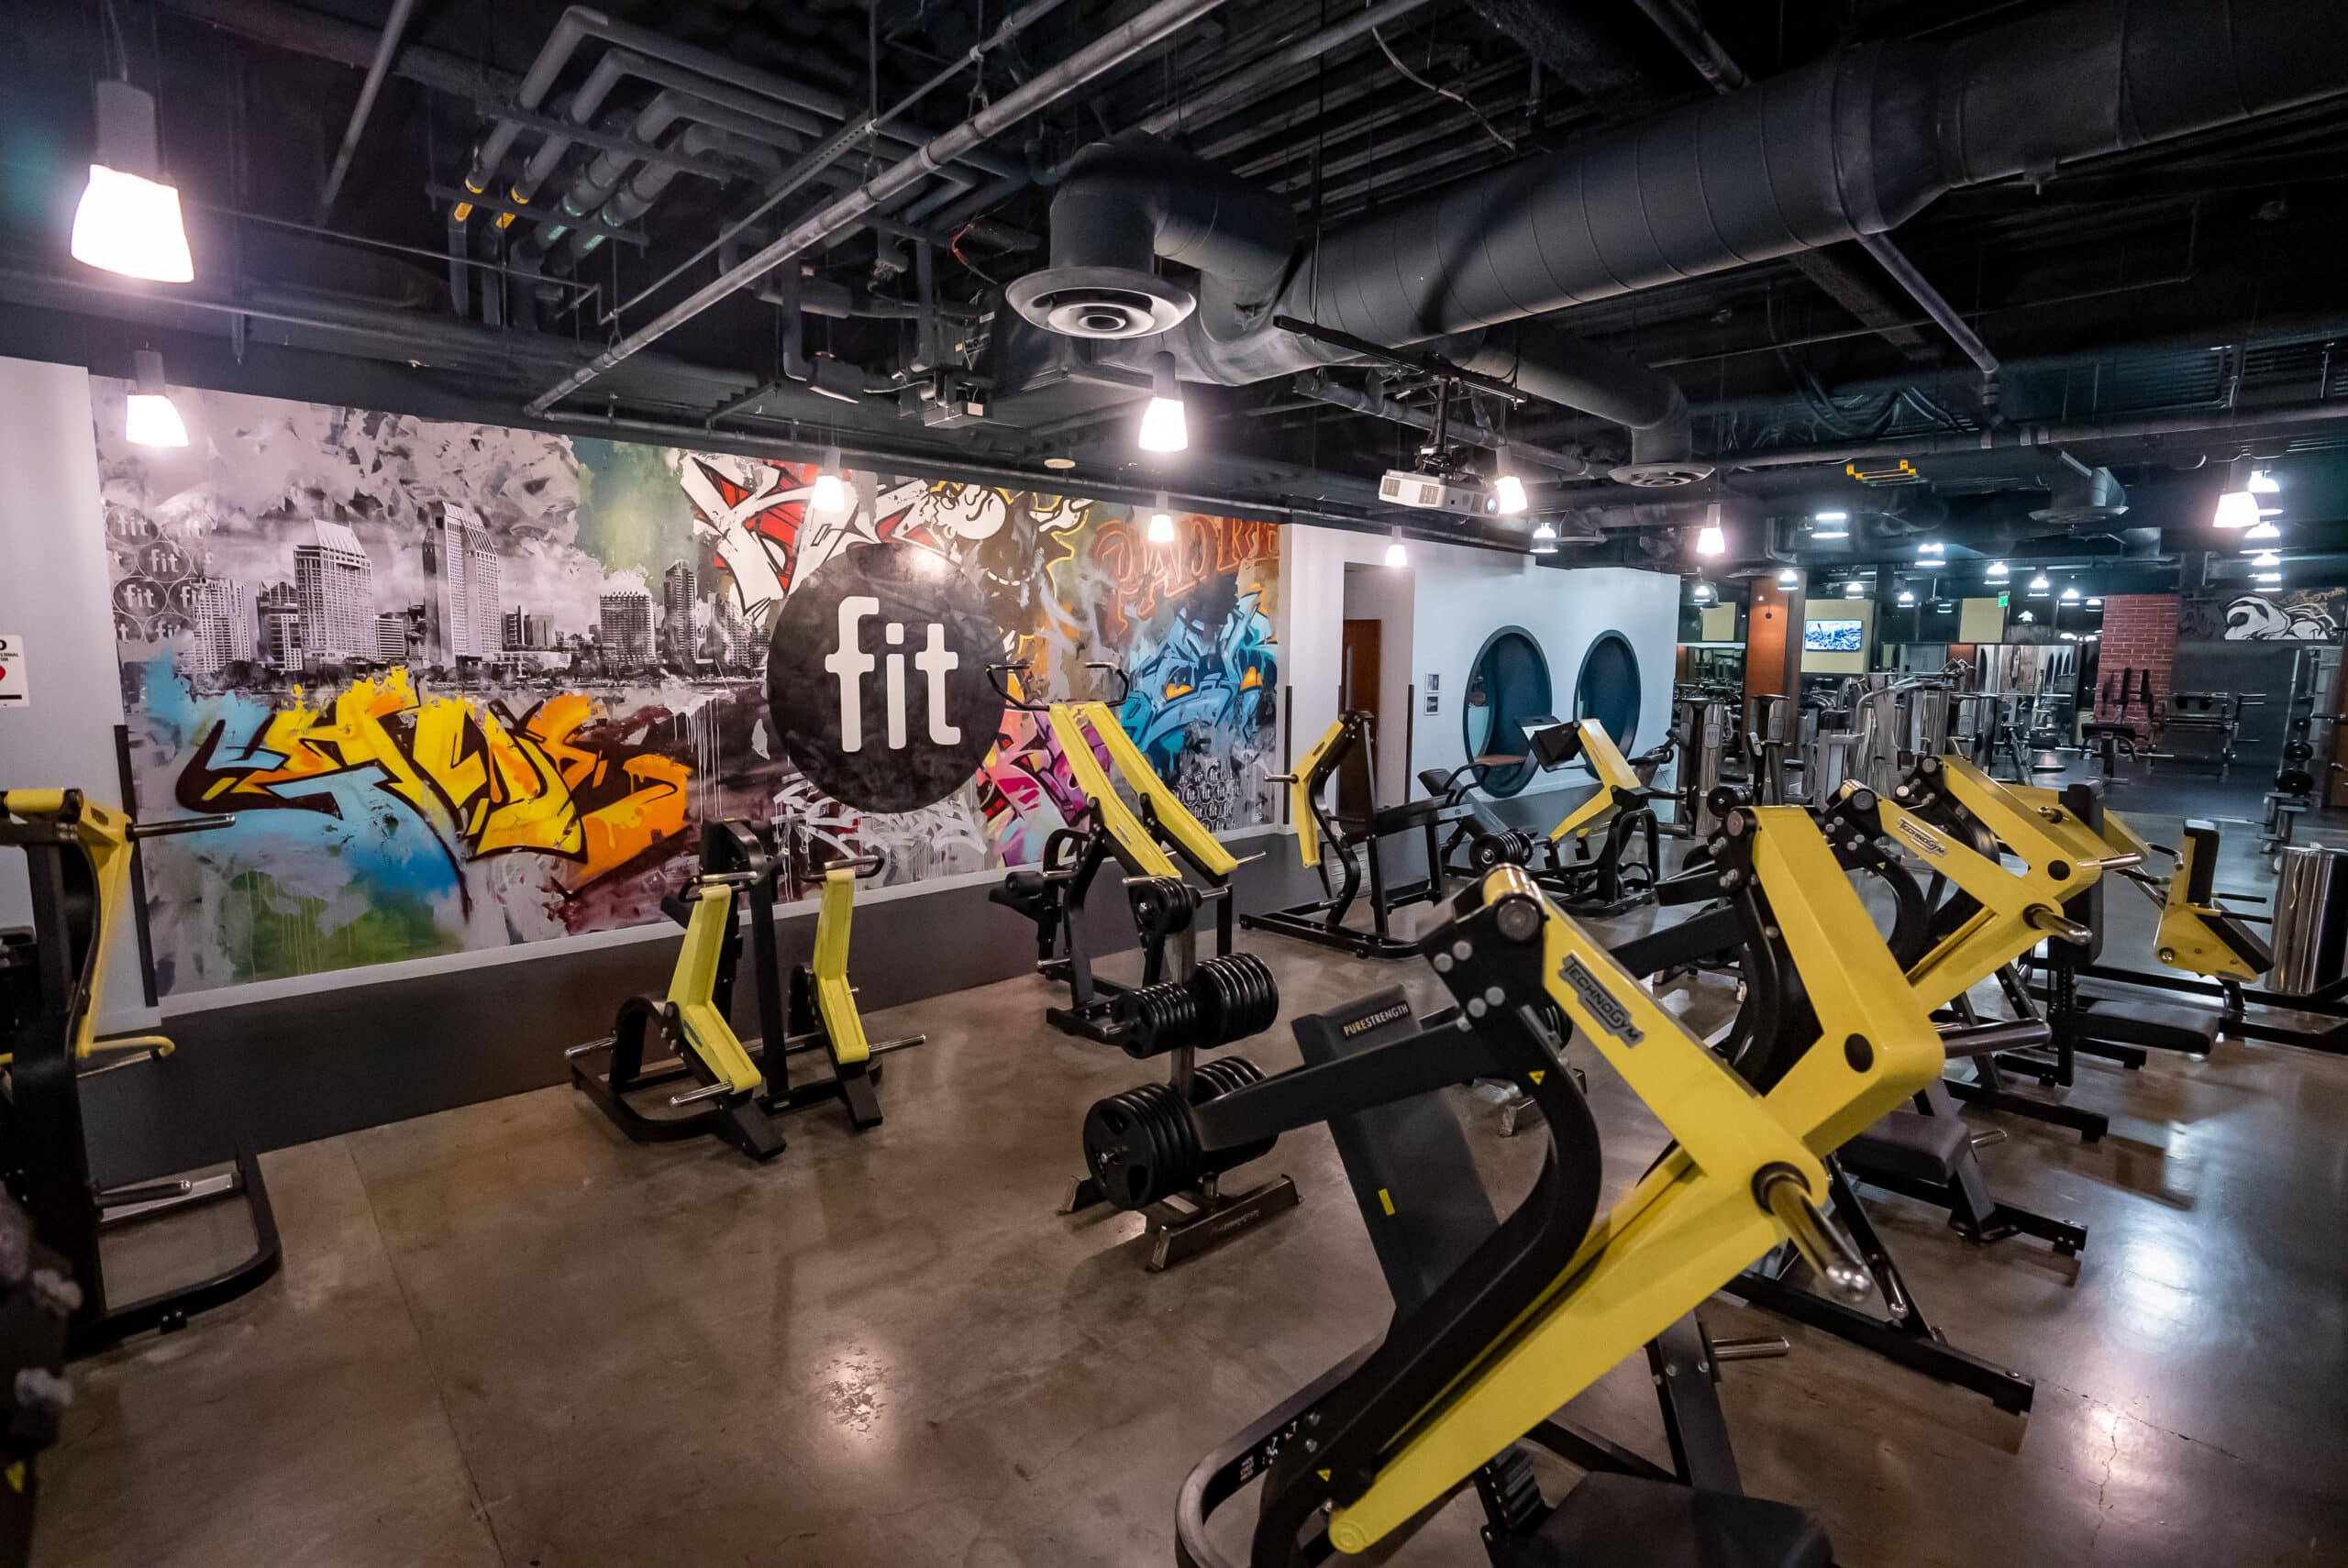 FIT ATHLETIC CLUB - 182 Photos & 718 Reviews - 350 10th Ave, San